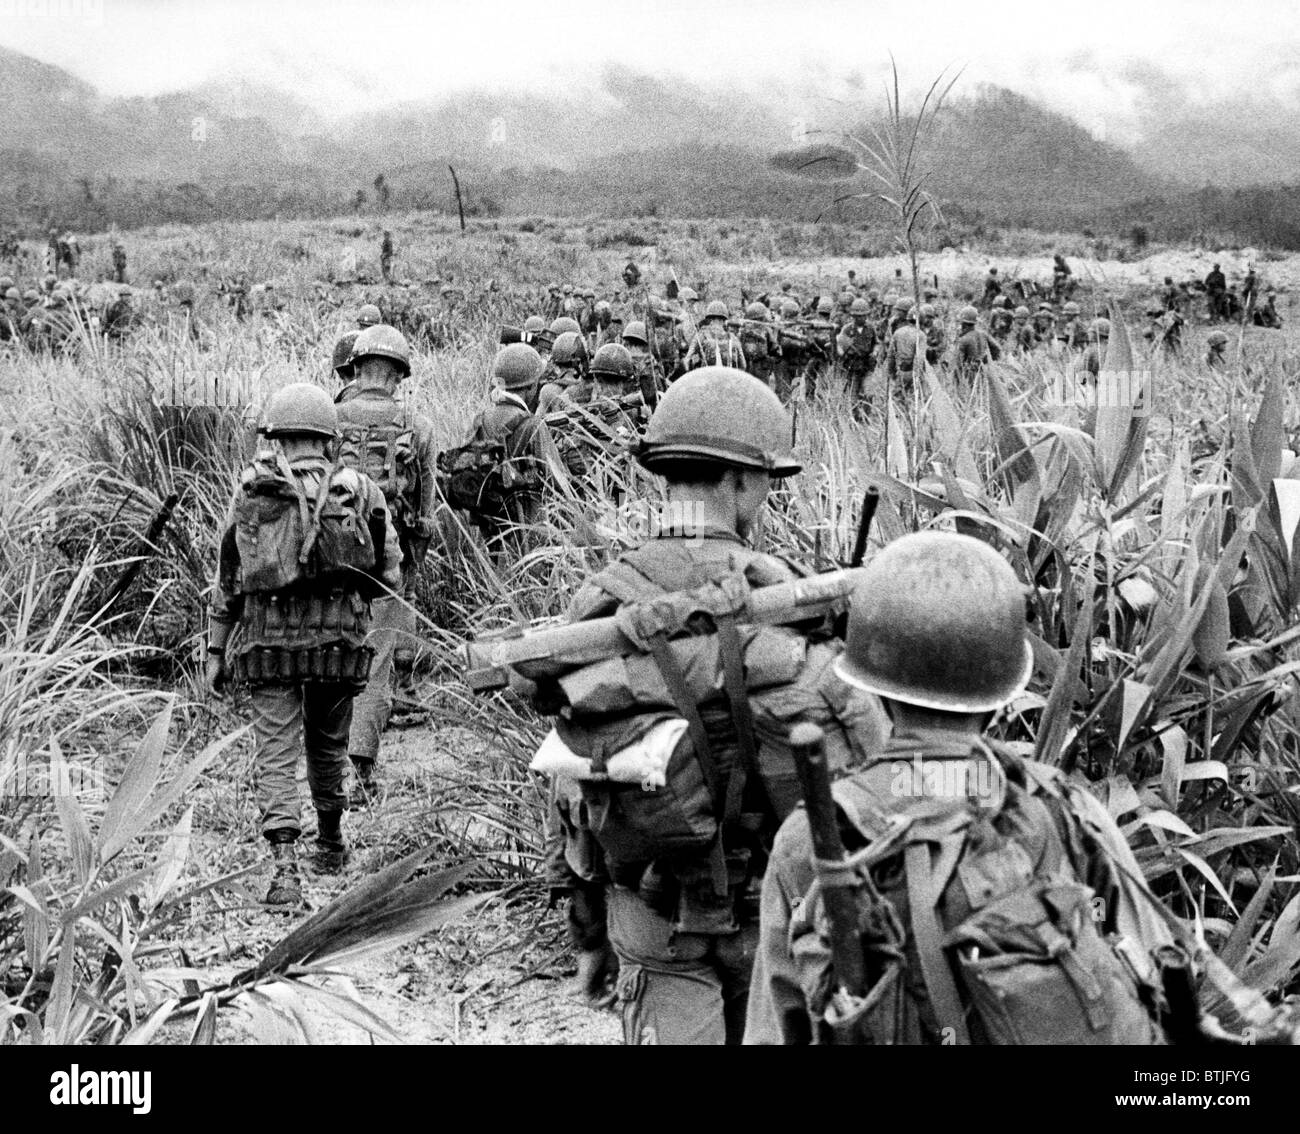 Troopers of the 327th Infantry, 101st Air Cavalry Division patrol the Laotian border during 'Operation Plain', August 14, 1968. Stock Photo